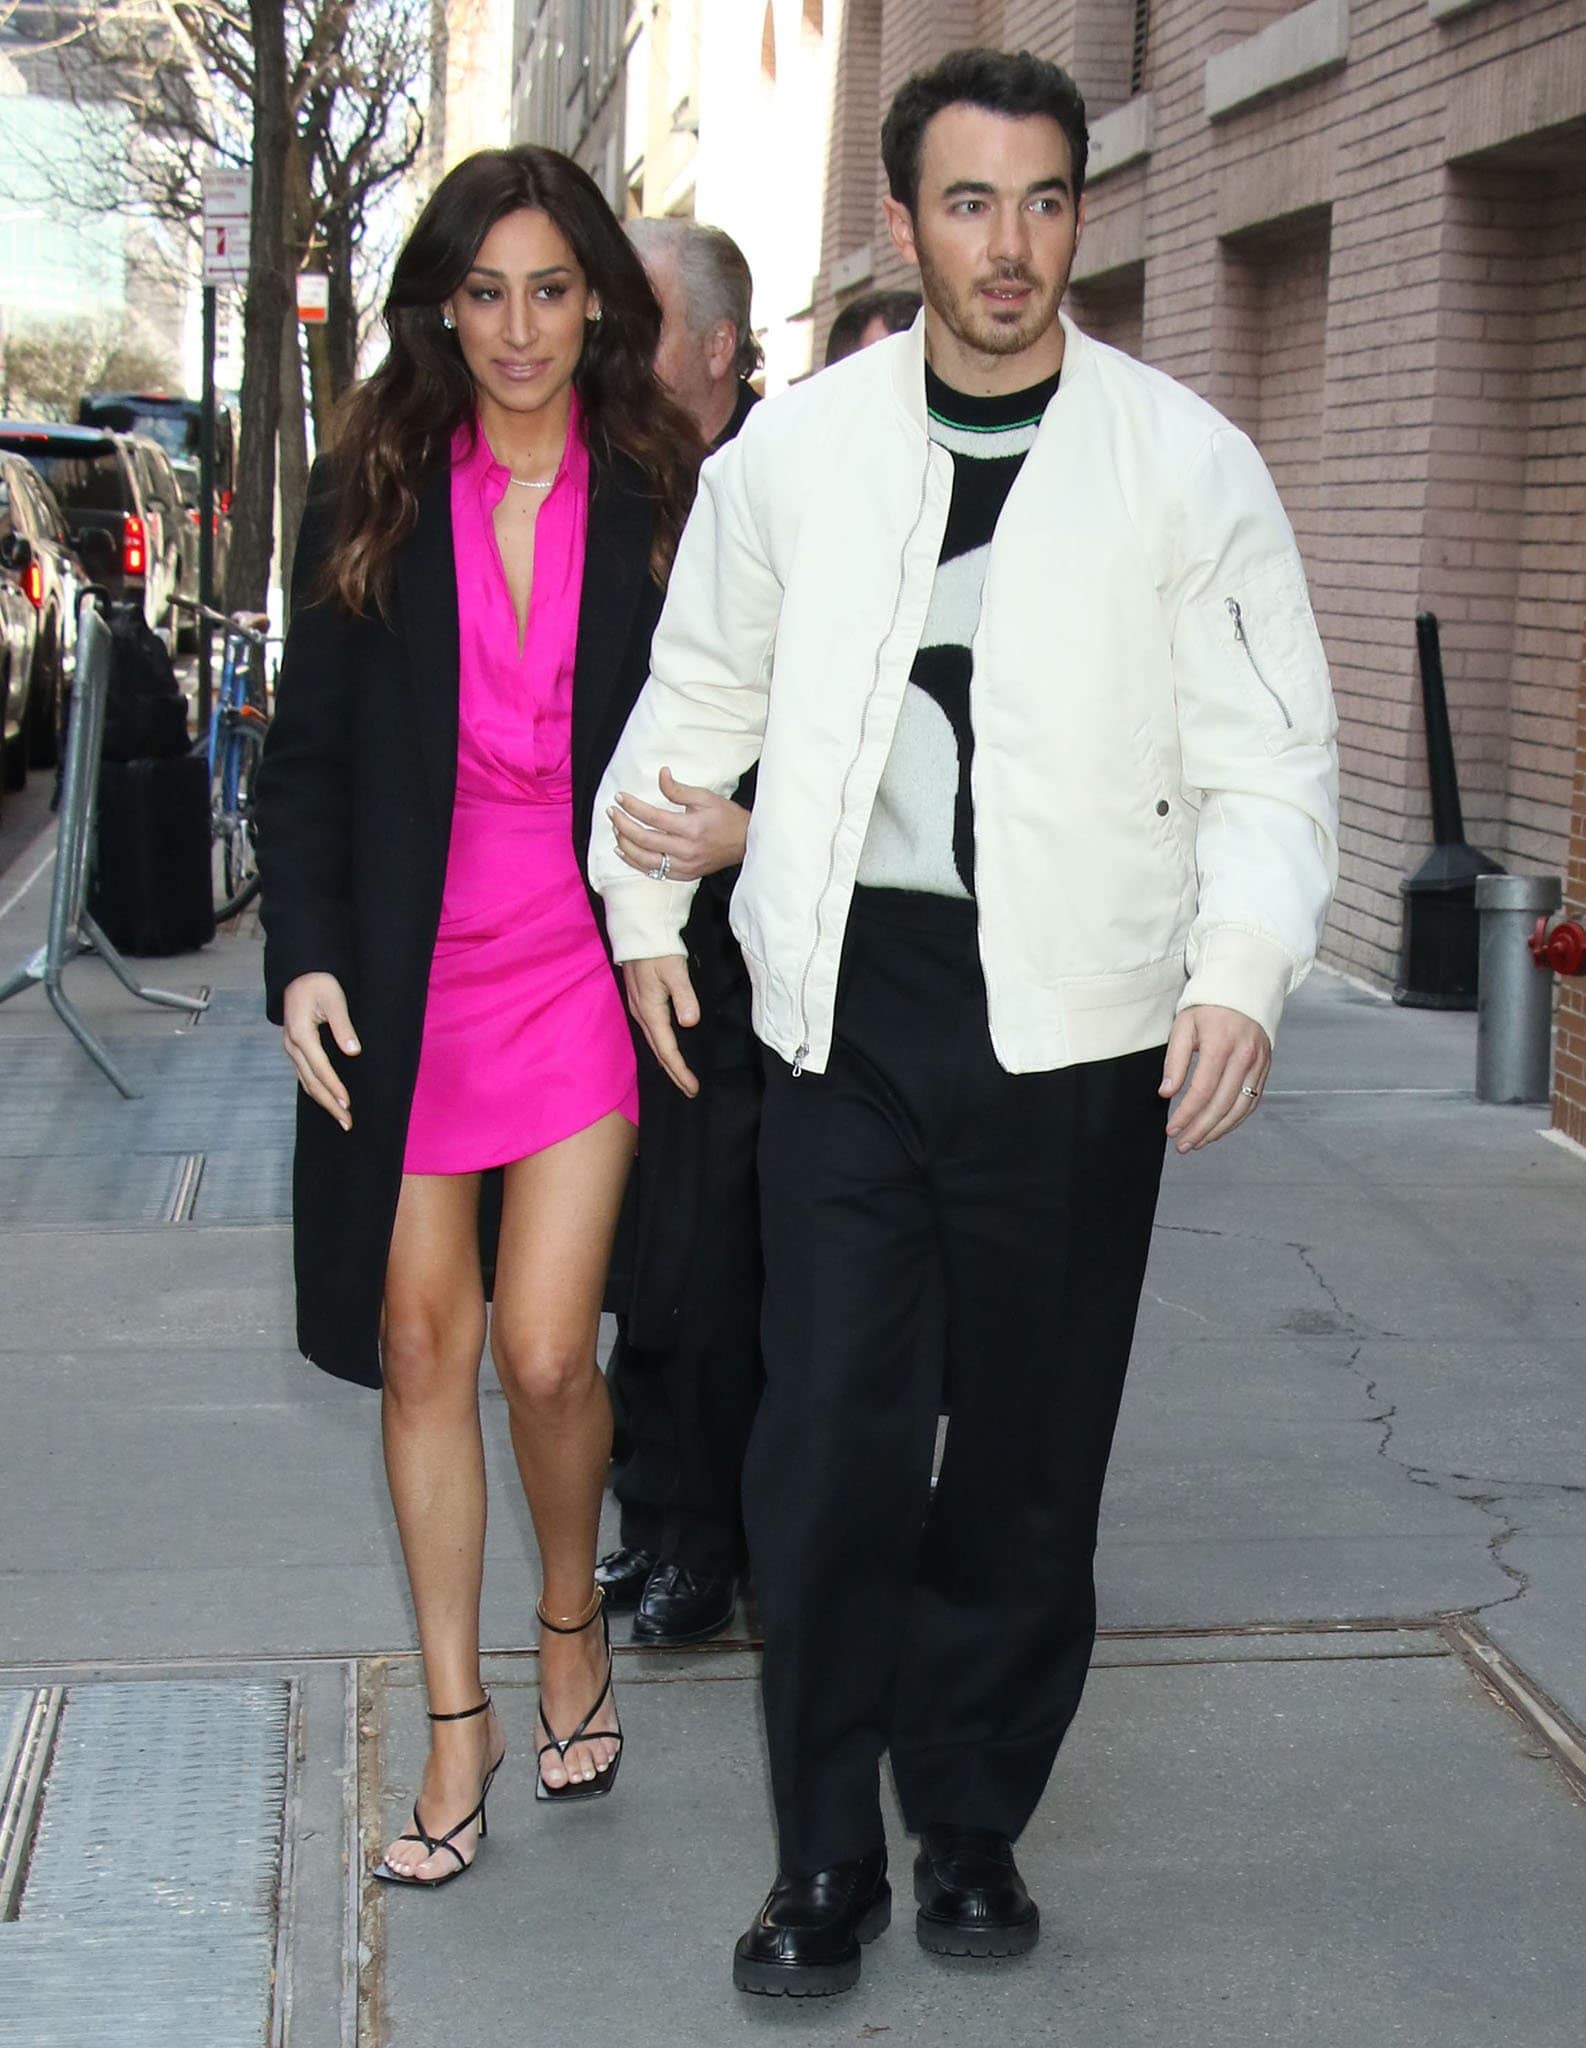 Danielle and Kevin Jonas continue their promo tour as they head to The View after their GMA appearance